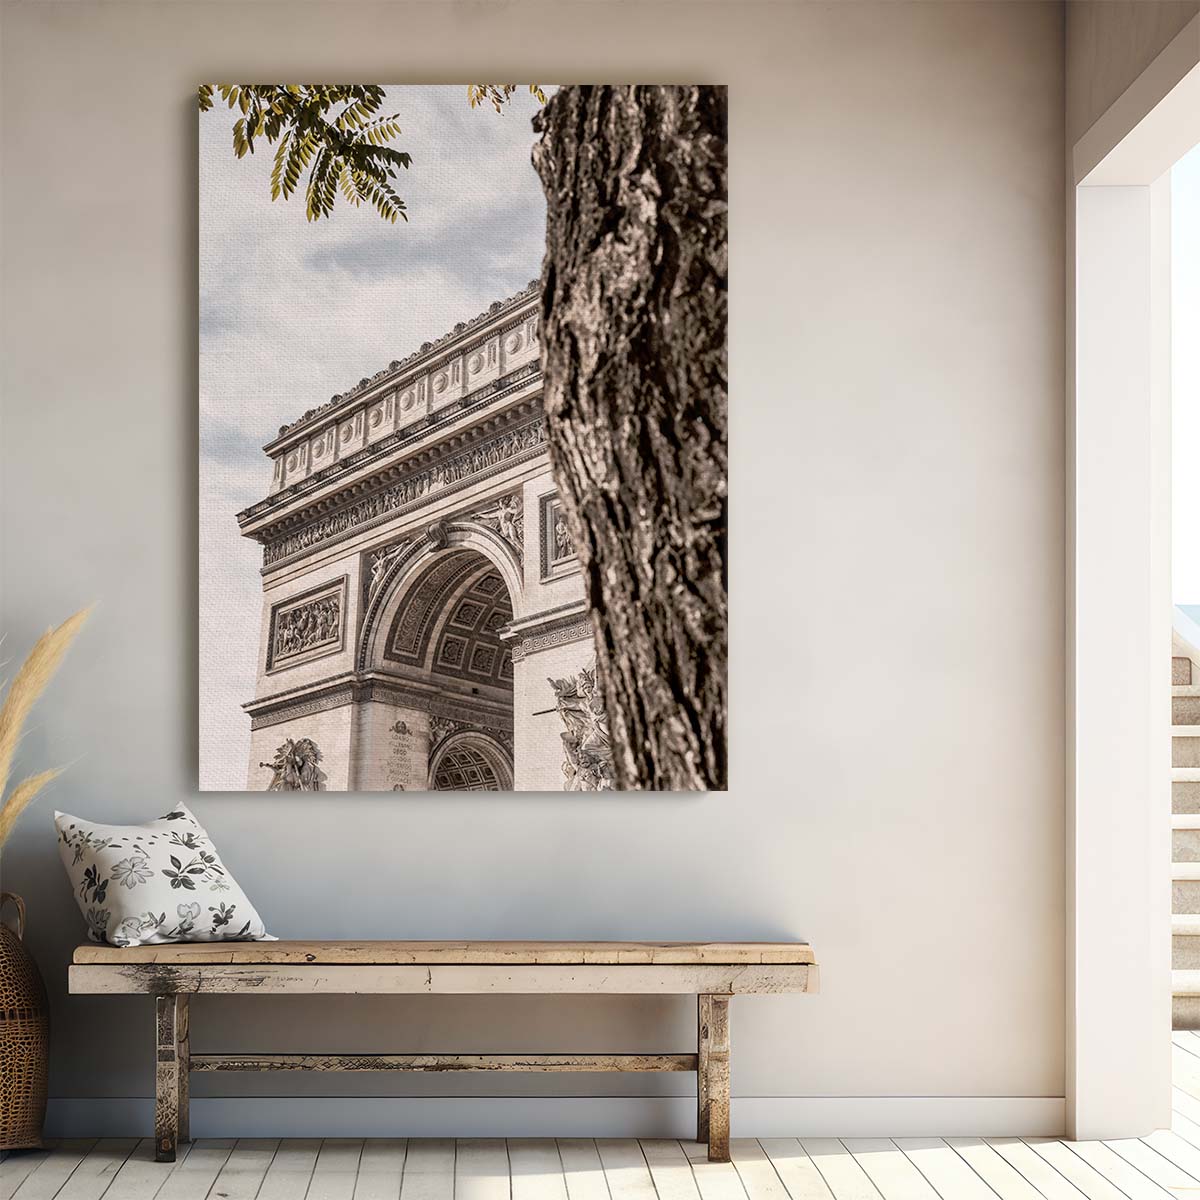 Iconic Arc de Triomphe Paris Cityscape Architecture Photography Wall Art by Luxuriance Designs, made in USA